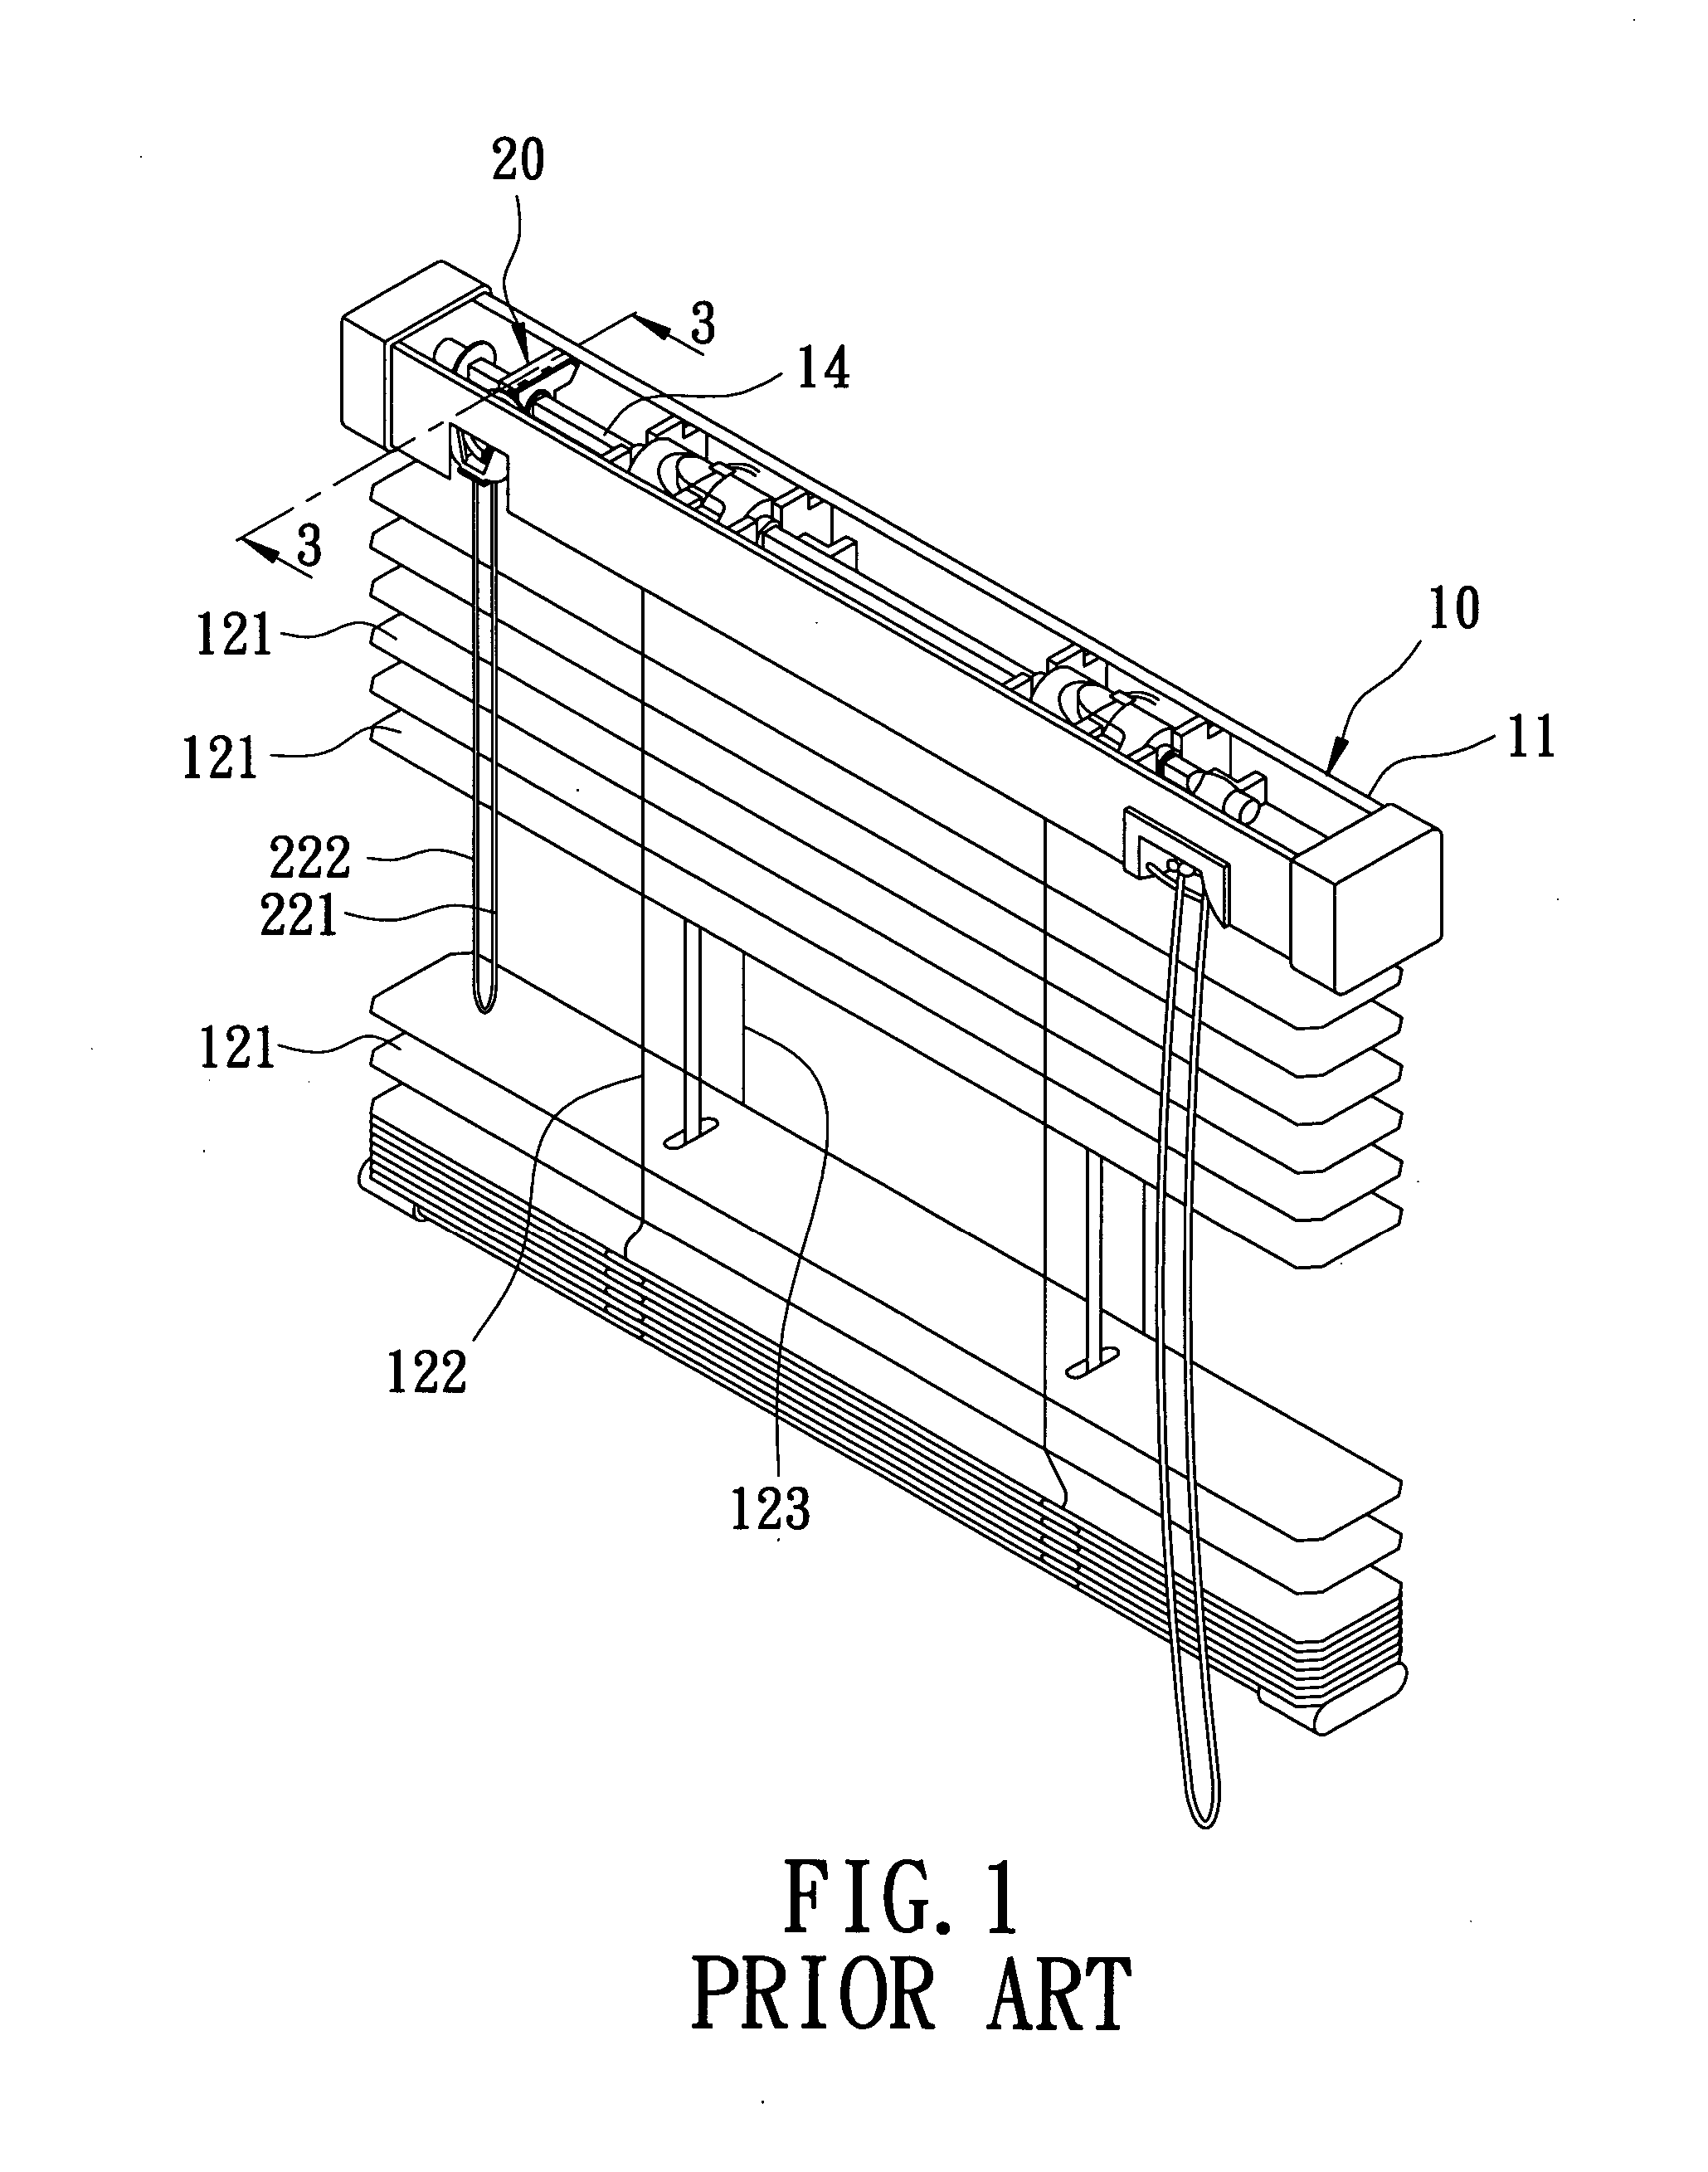 Slat tilting device for a window covering